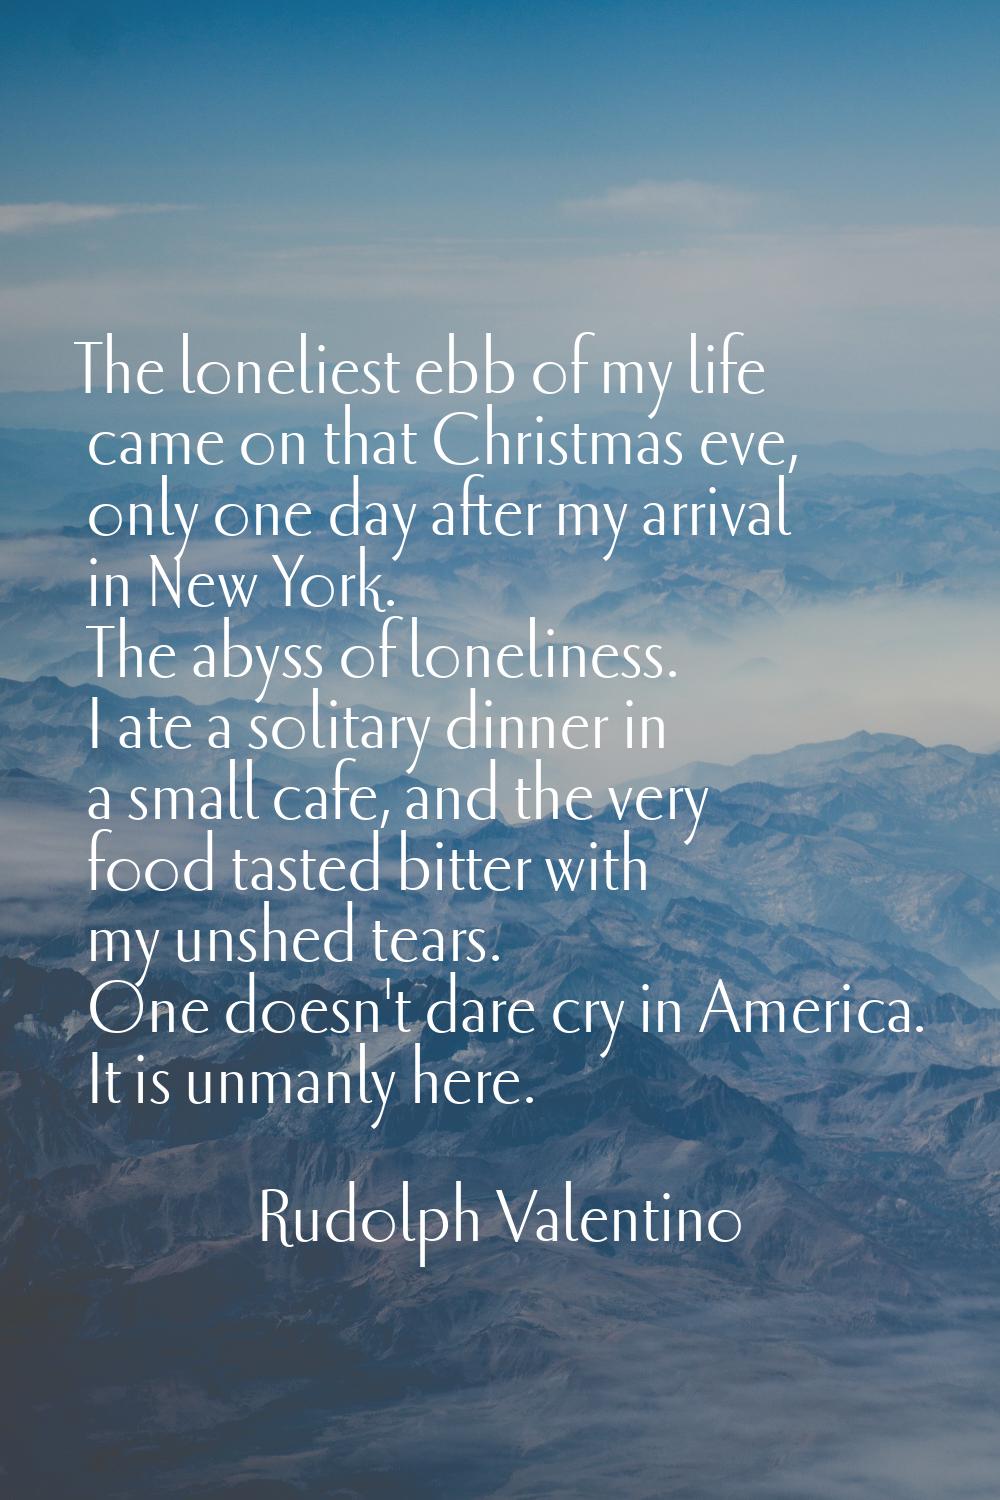 The loneliest ebb of my life came on that Christmas eve, only one day after my arrival in New York.